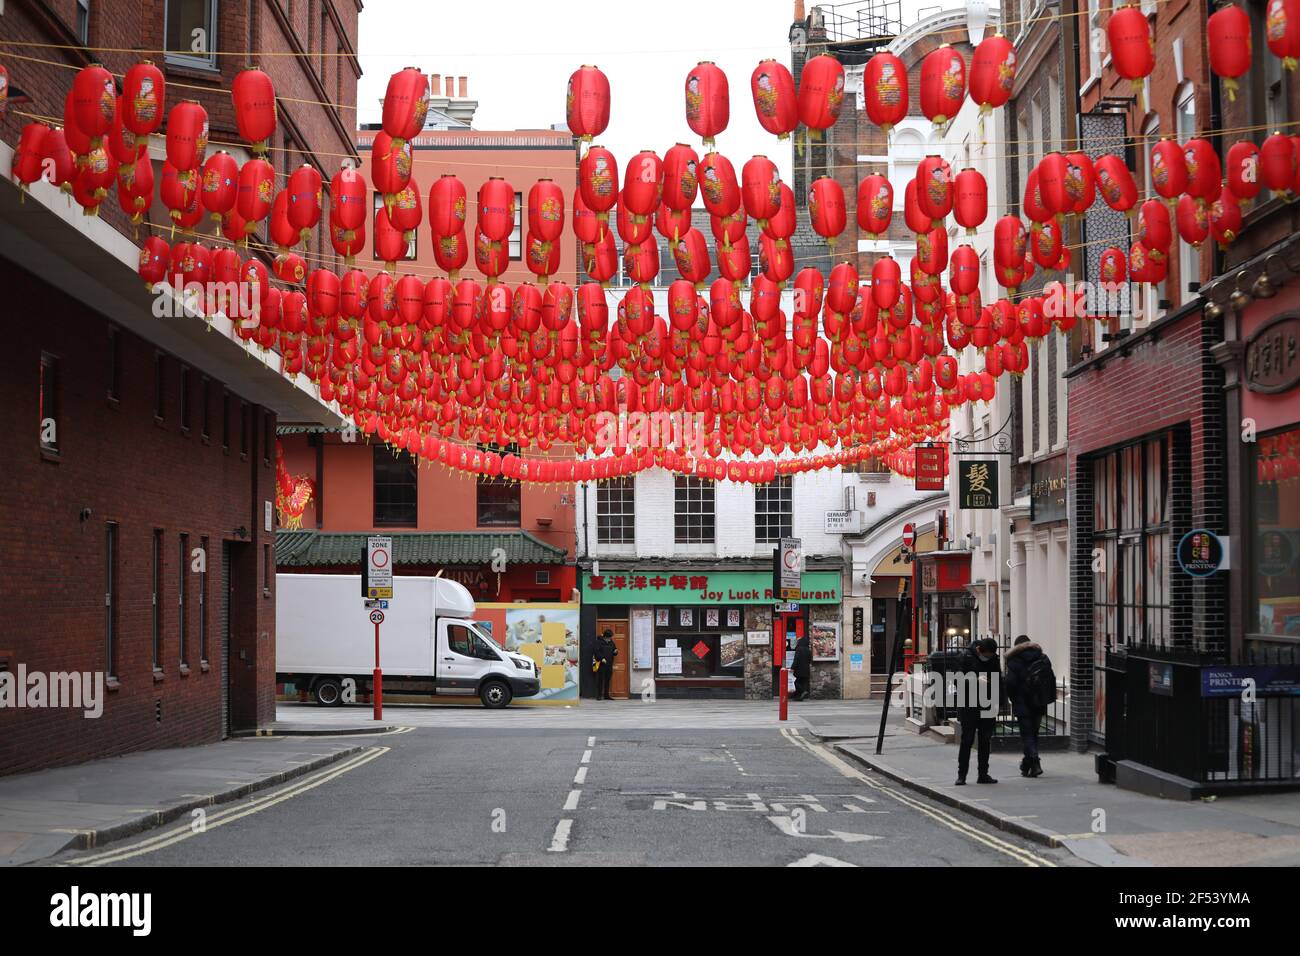 London, UK. 23rd Mar, 2021. Chinatown is still very quiet. Today marks the first anniversary of the start of UK lockdown restrictions because of the COVID-19 Coronavirus pandemic. A national minute's silence at 12.00pm marks the moment of reflection. London is pictured today (March 23, 2021), on the anniversary of the first Coronavirus lockdown. Credit: Paul Marriott/Alamy Live News Stock Photo